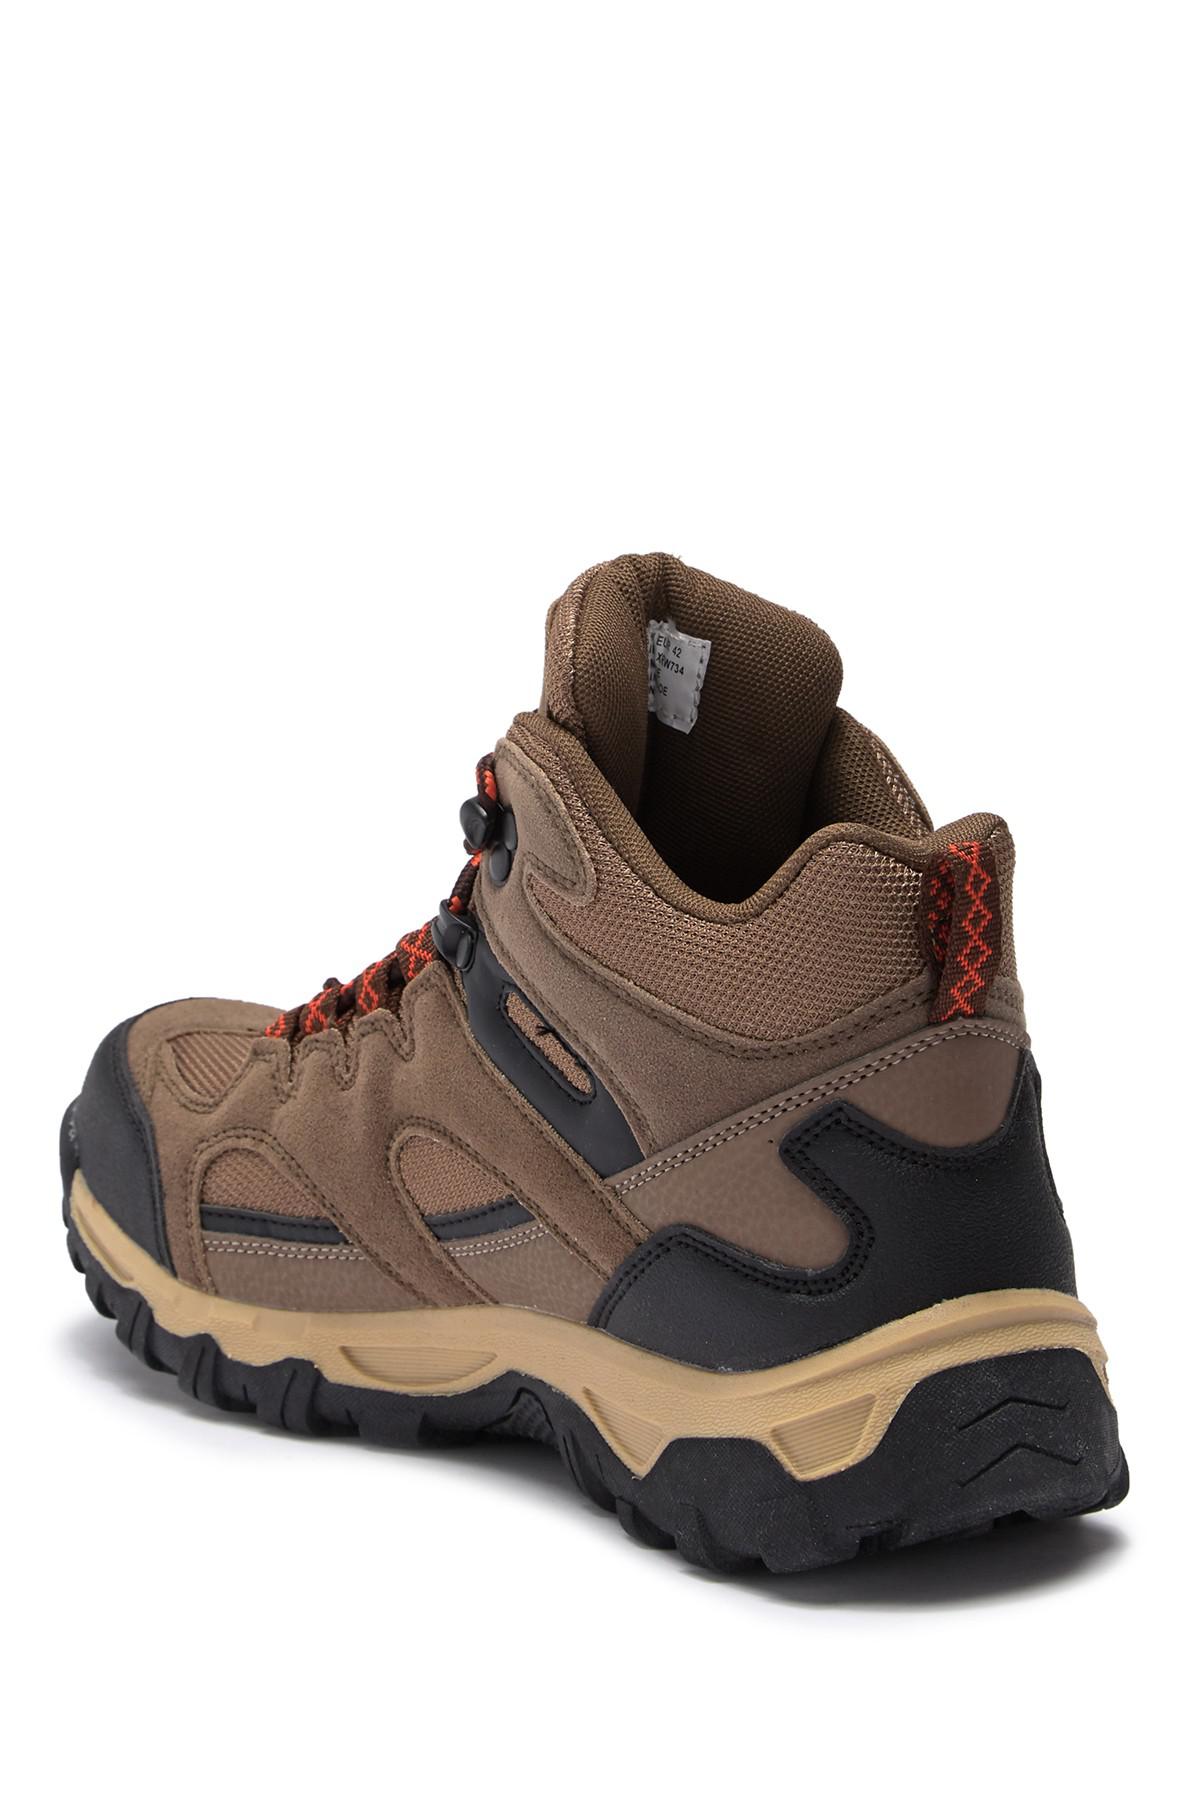 Xray Jeans Synthetic Hiking Boot in Brown for Men - Lyst